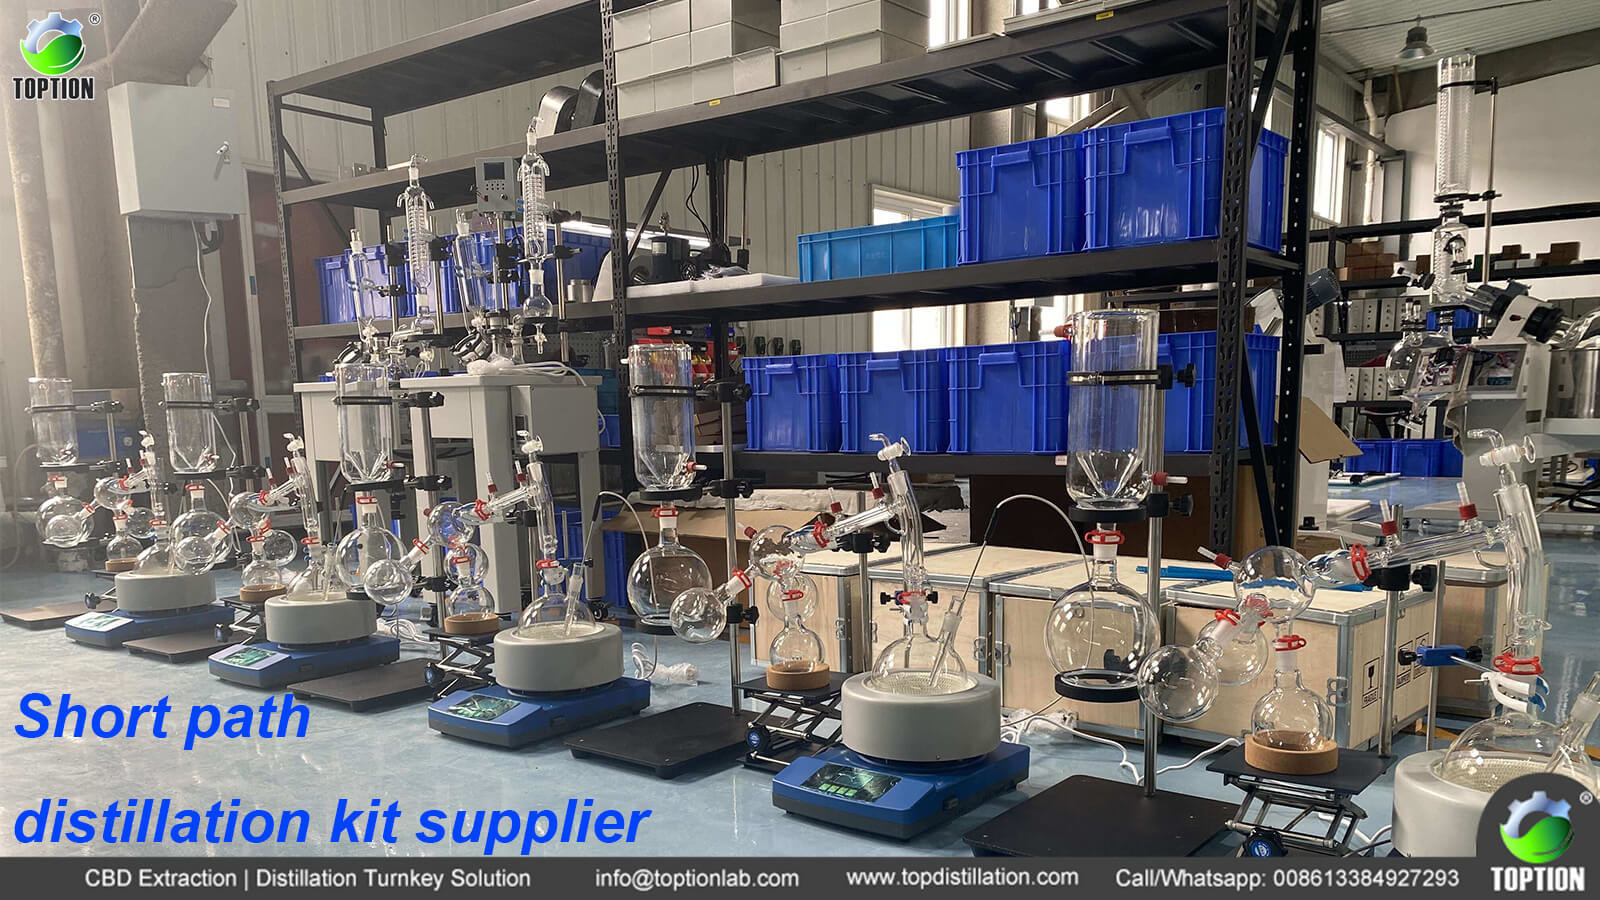 latest company news about How to clean short path distillation kit  0